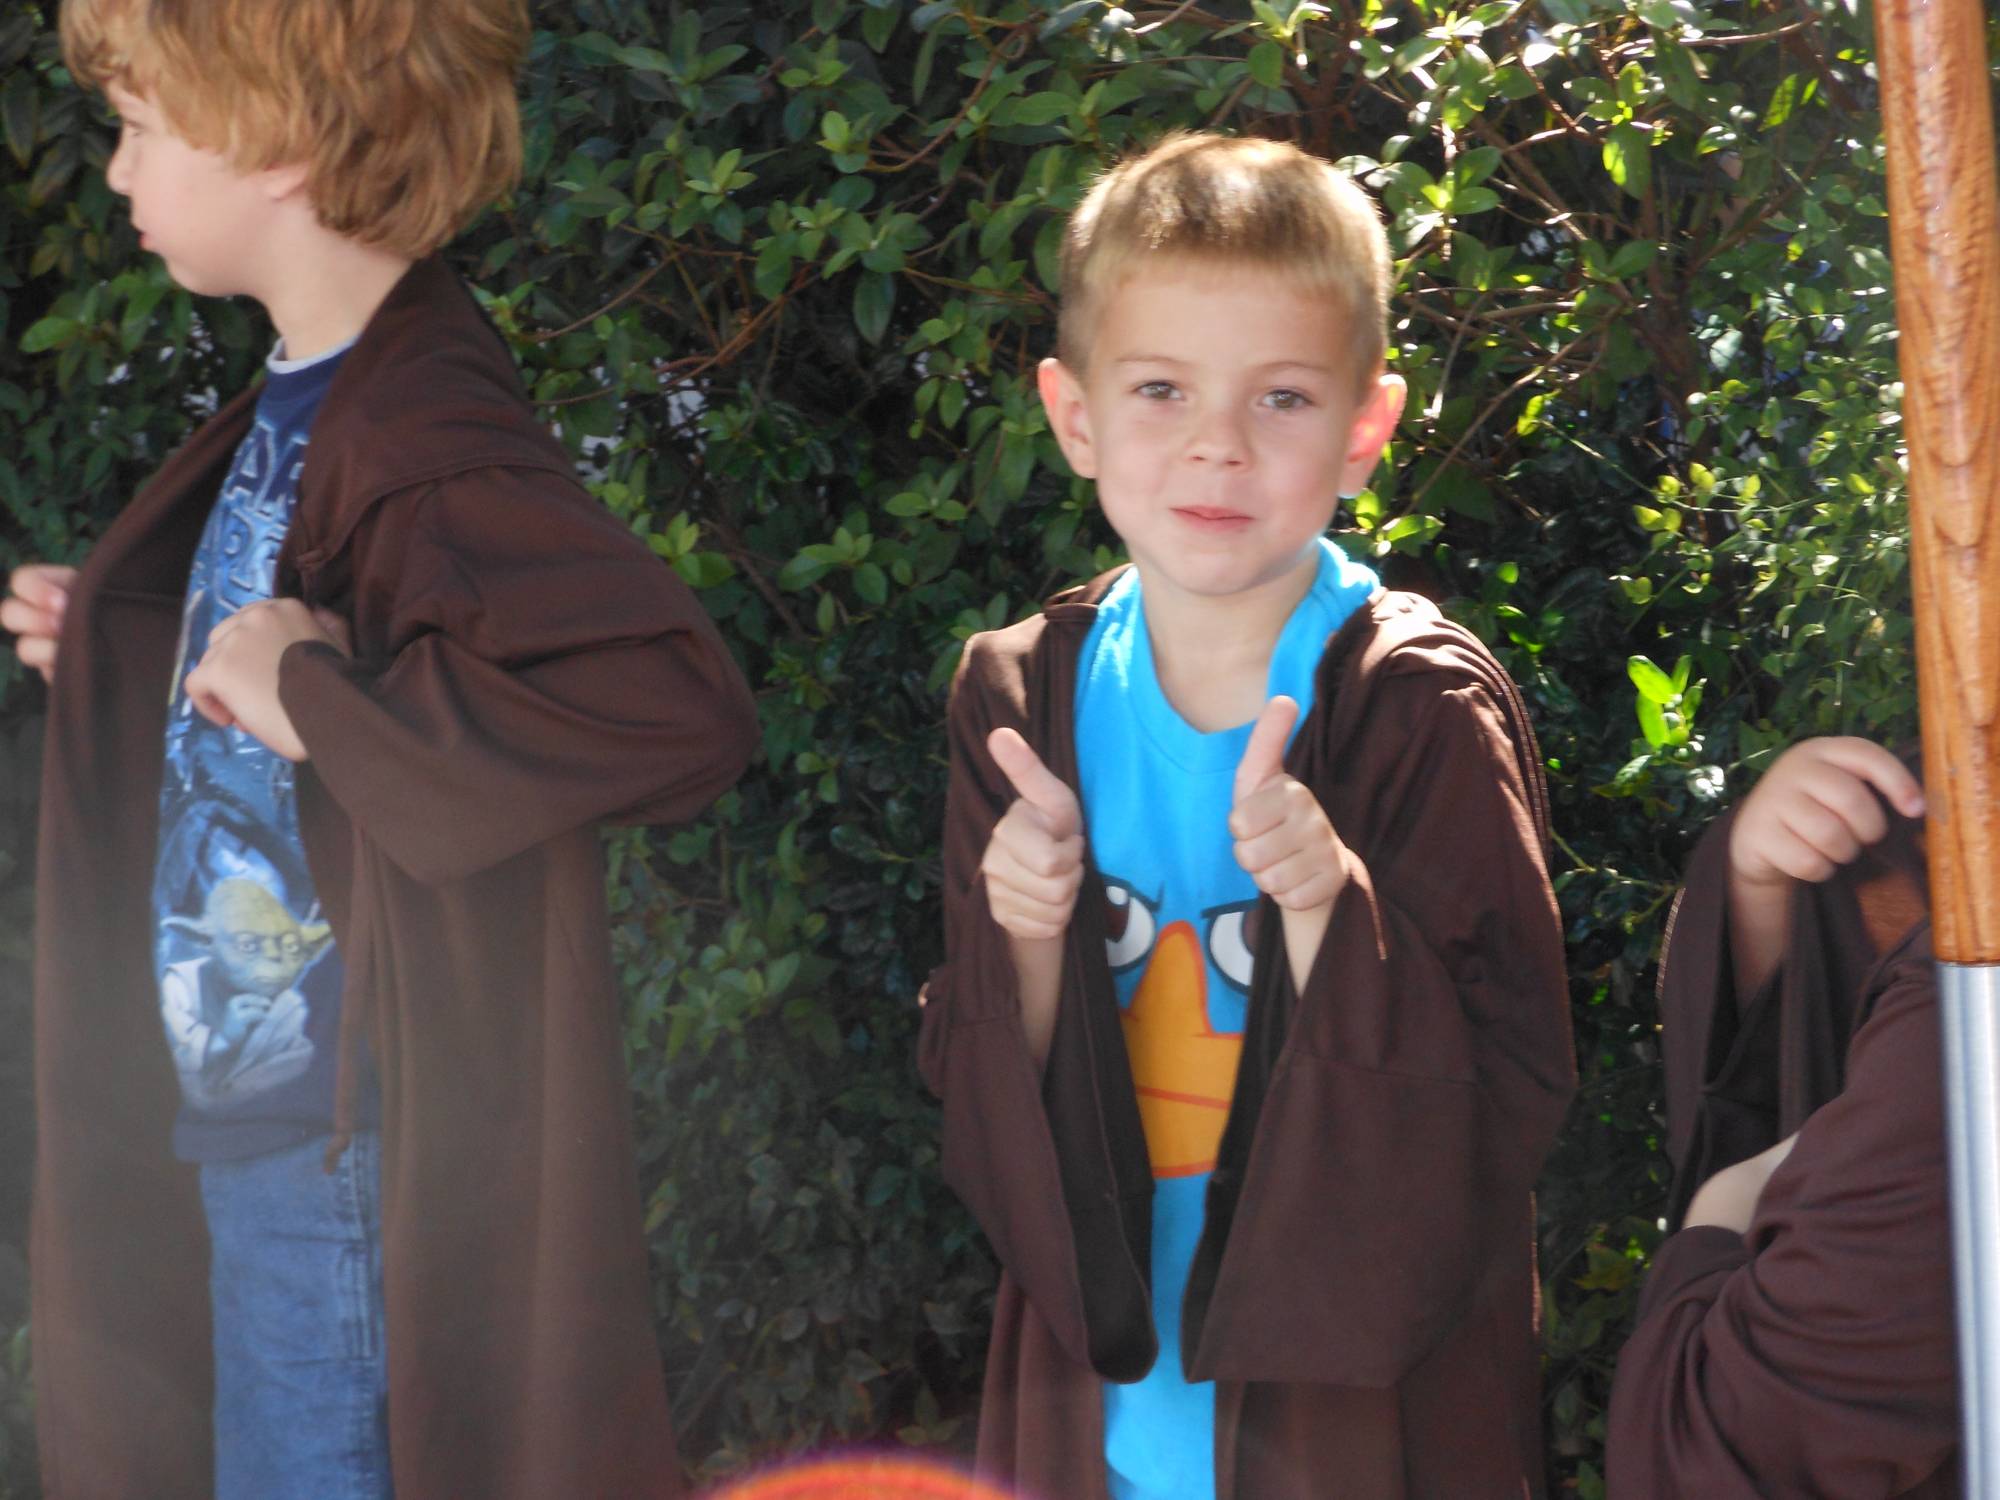 Children learn the way of the Jedi at Disney Hollywood Studios | PassPorter.com